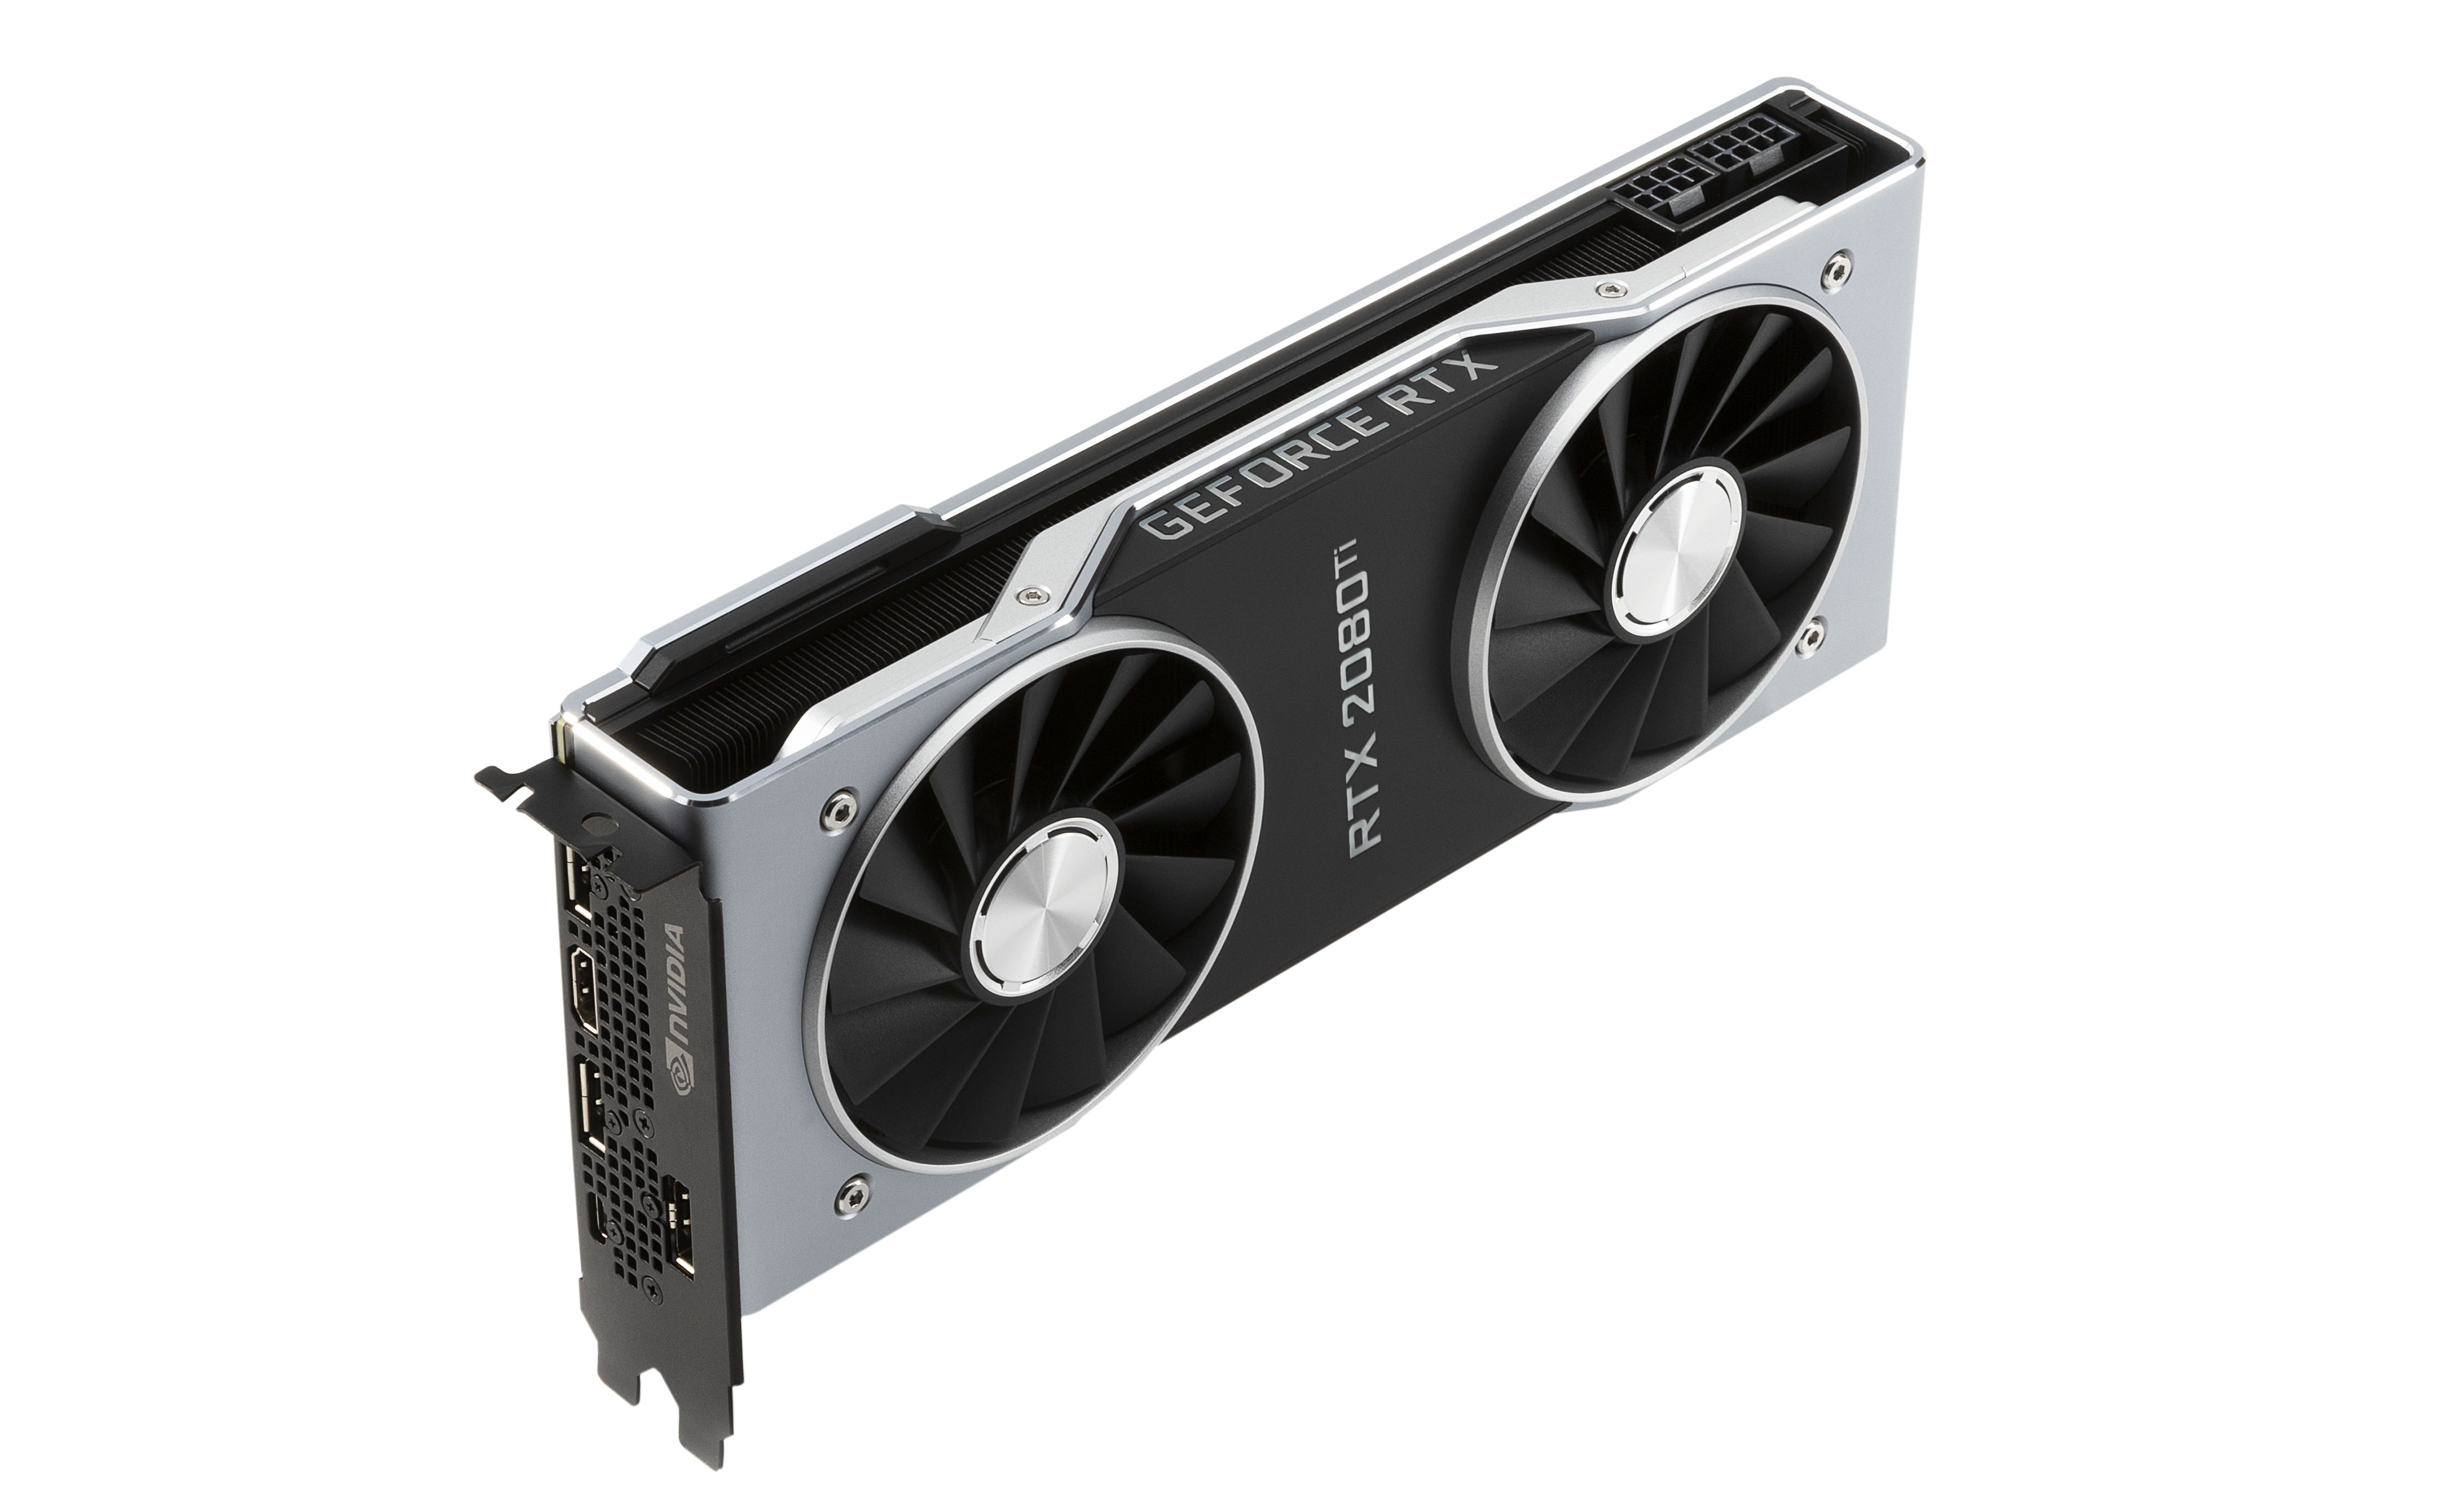 Meet The 2080 Ti & RTX 2080 Founders Editions Cards - The NVIDIA GeForce RTX 2080 Ti RTX 2080 Founders Edition Review: Foundations For A Traced Future